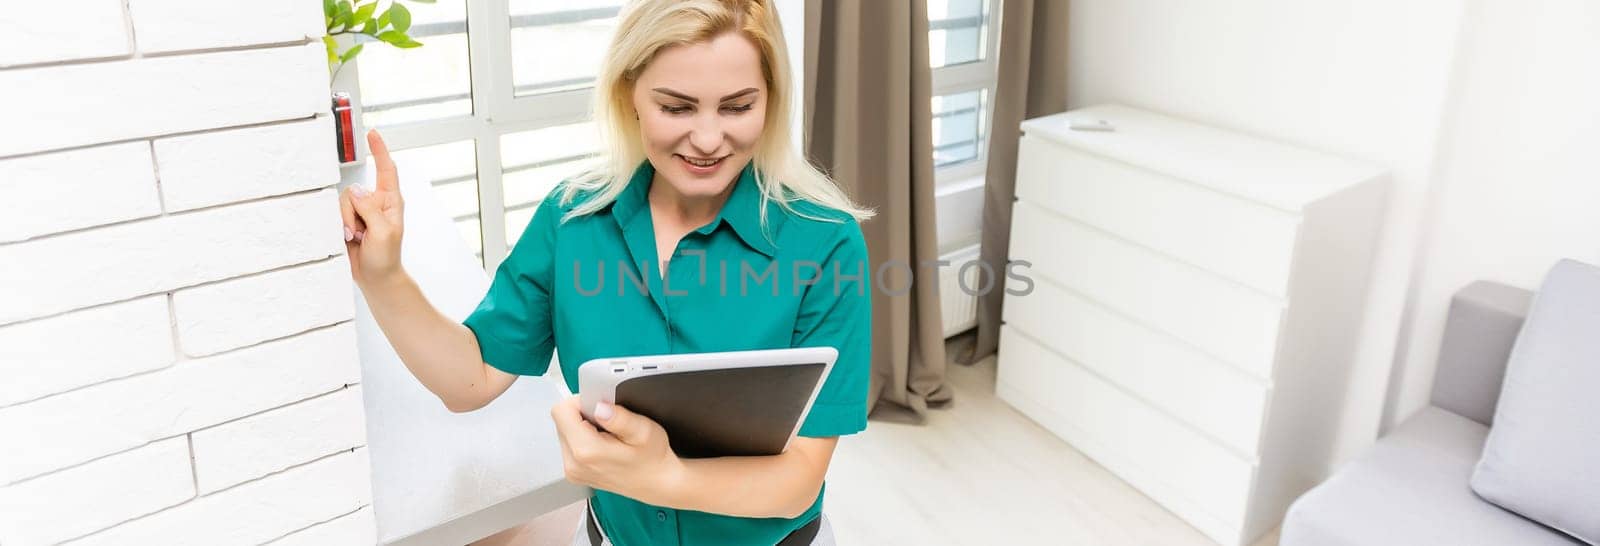 woman regulating heating temperature with a modern wireless thermostat installed on the white wall at home. Smart home heating regulation concept.